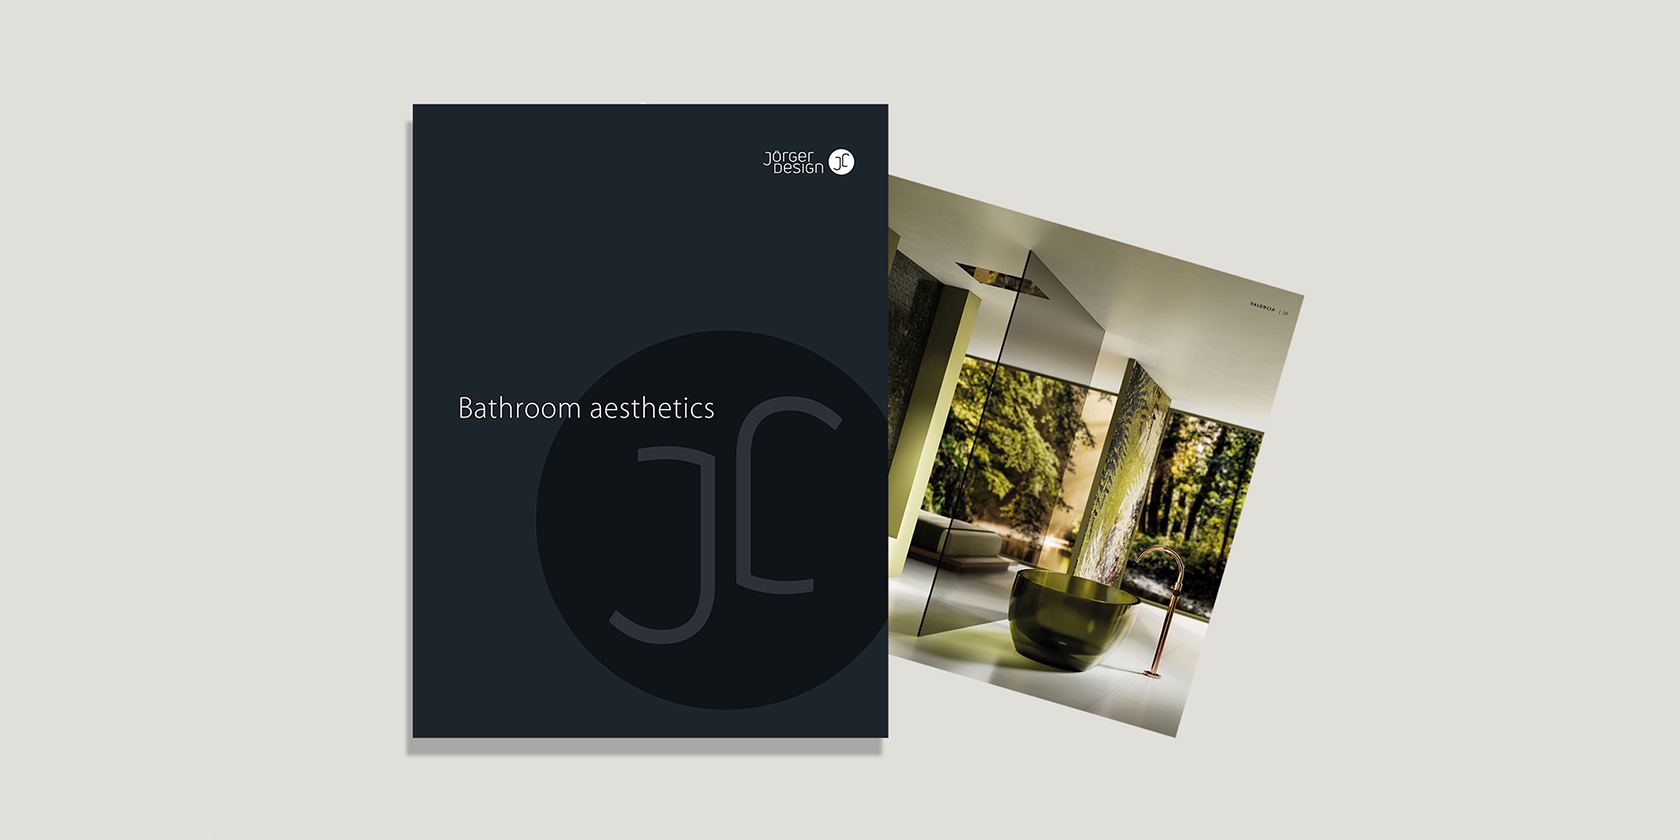 Jörger Is Launching Its “Bathroom Aesthetics” Complete Catalog for the US Market